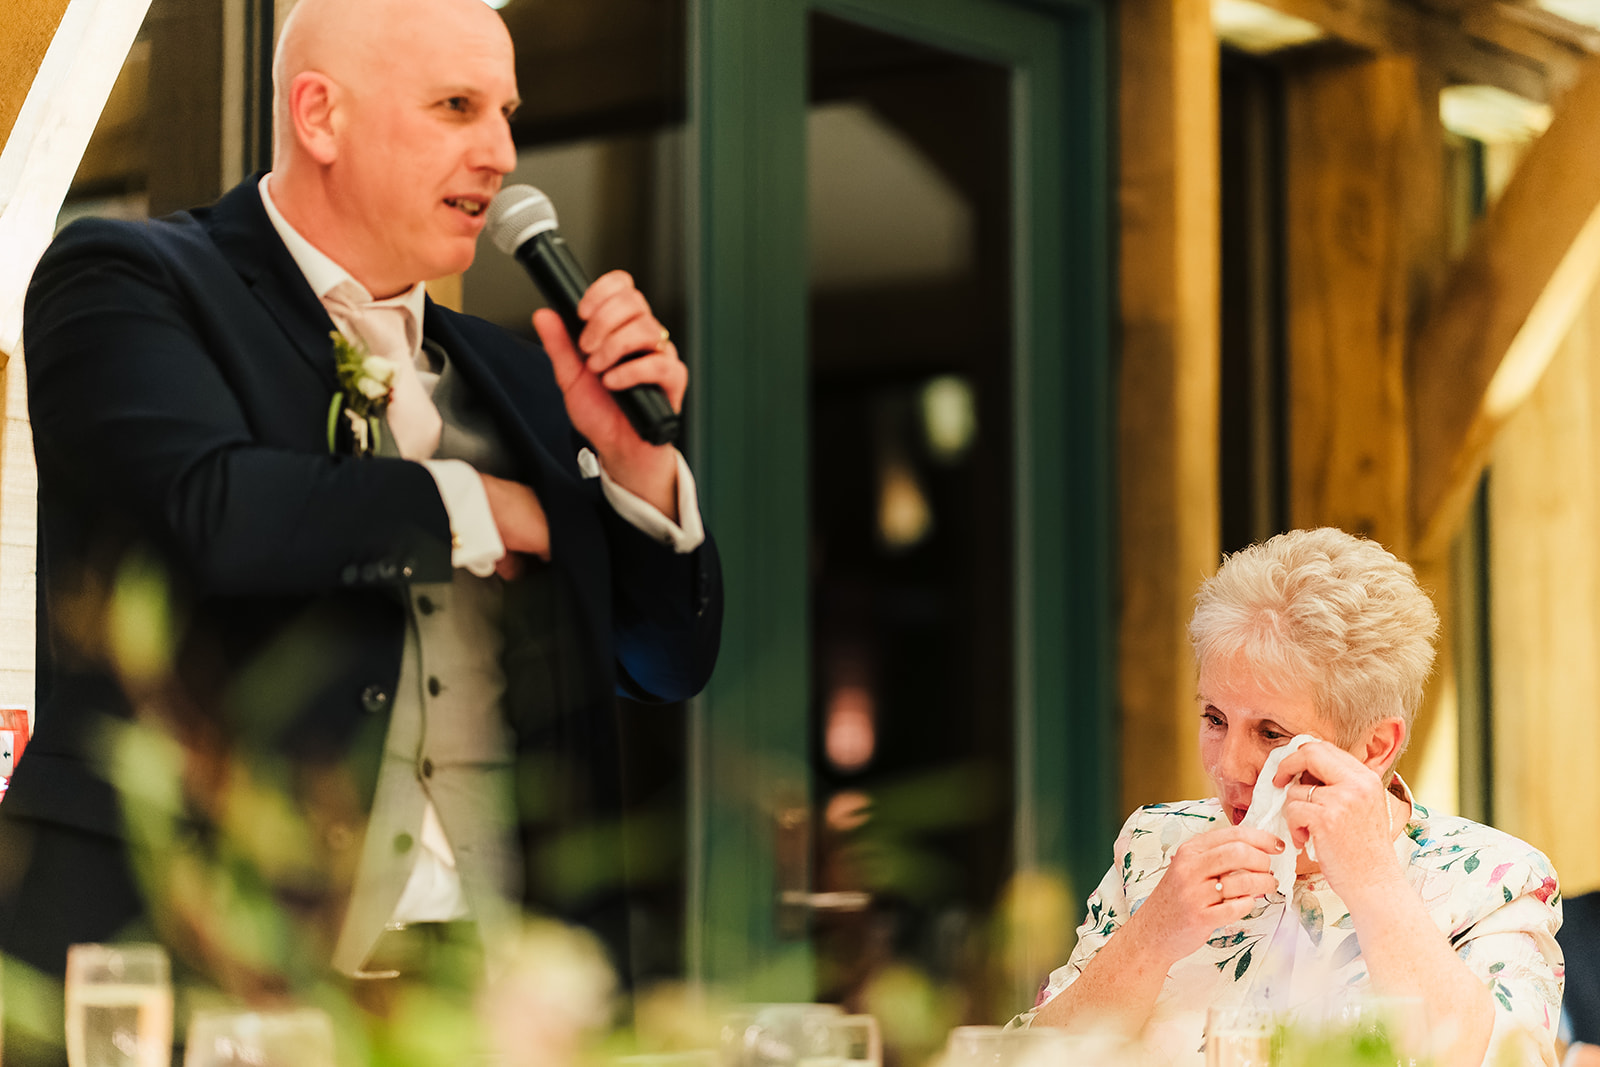 Hazel Gap Wedding Photography - the mother of the groom getting emotional during the wedding speeches